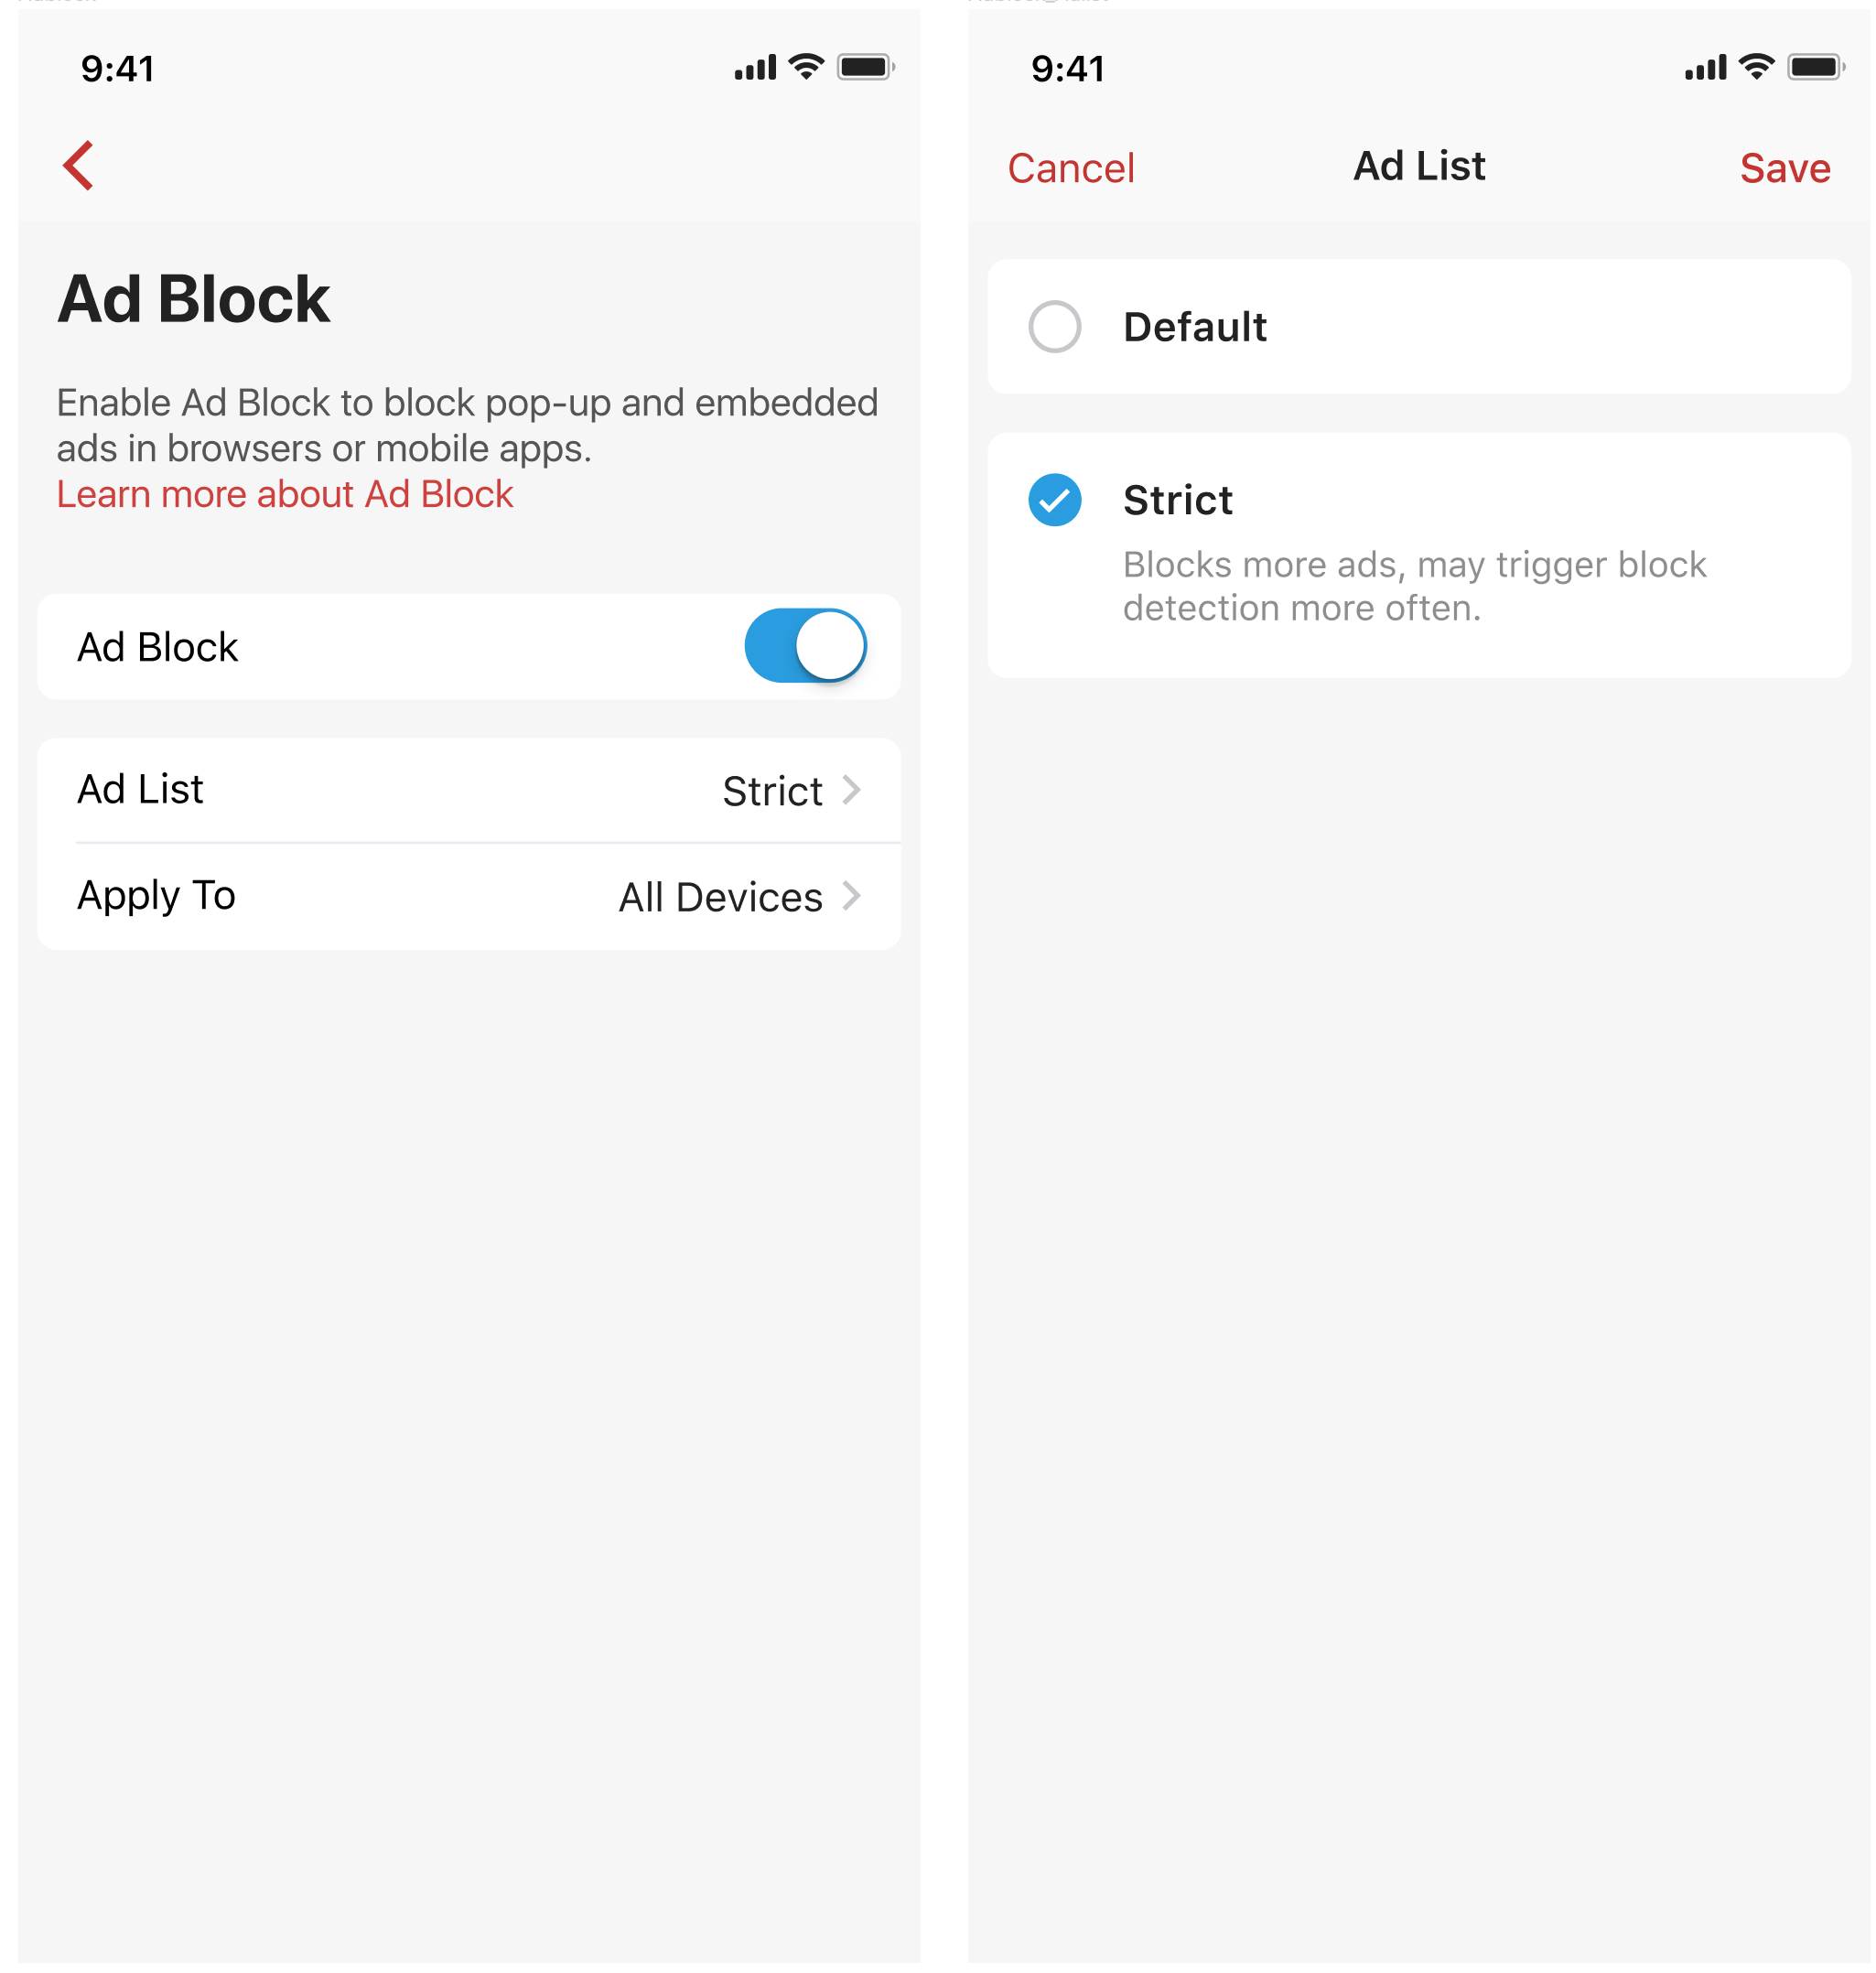 Strict Ad Block offered in 1.45 App Release